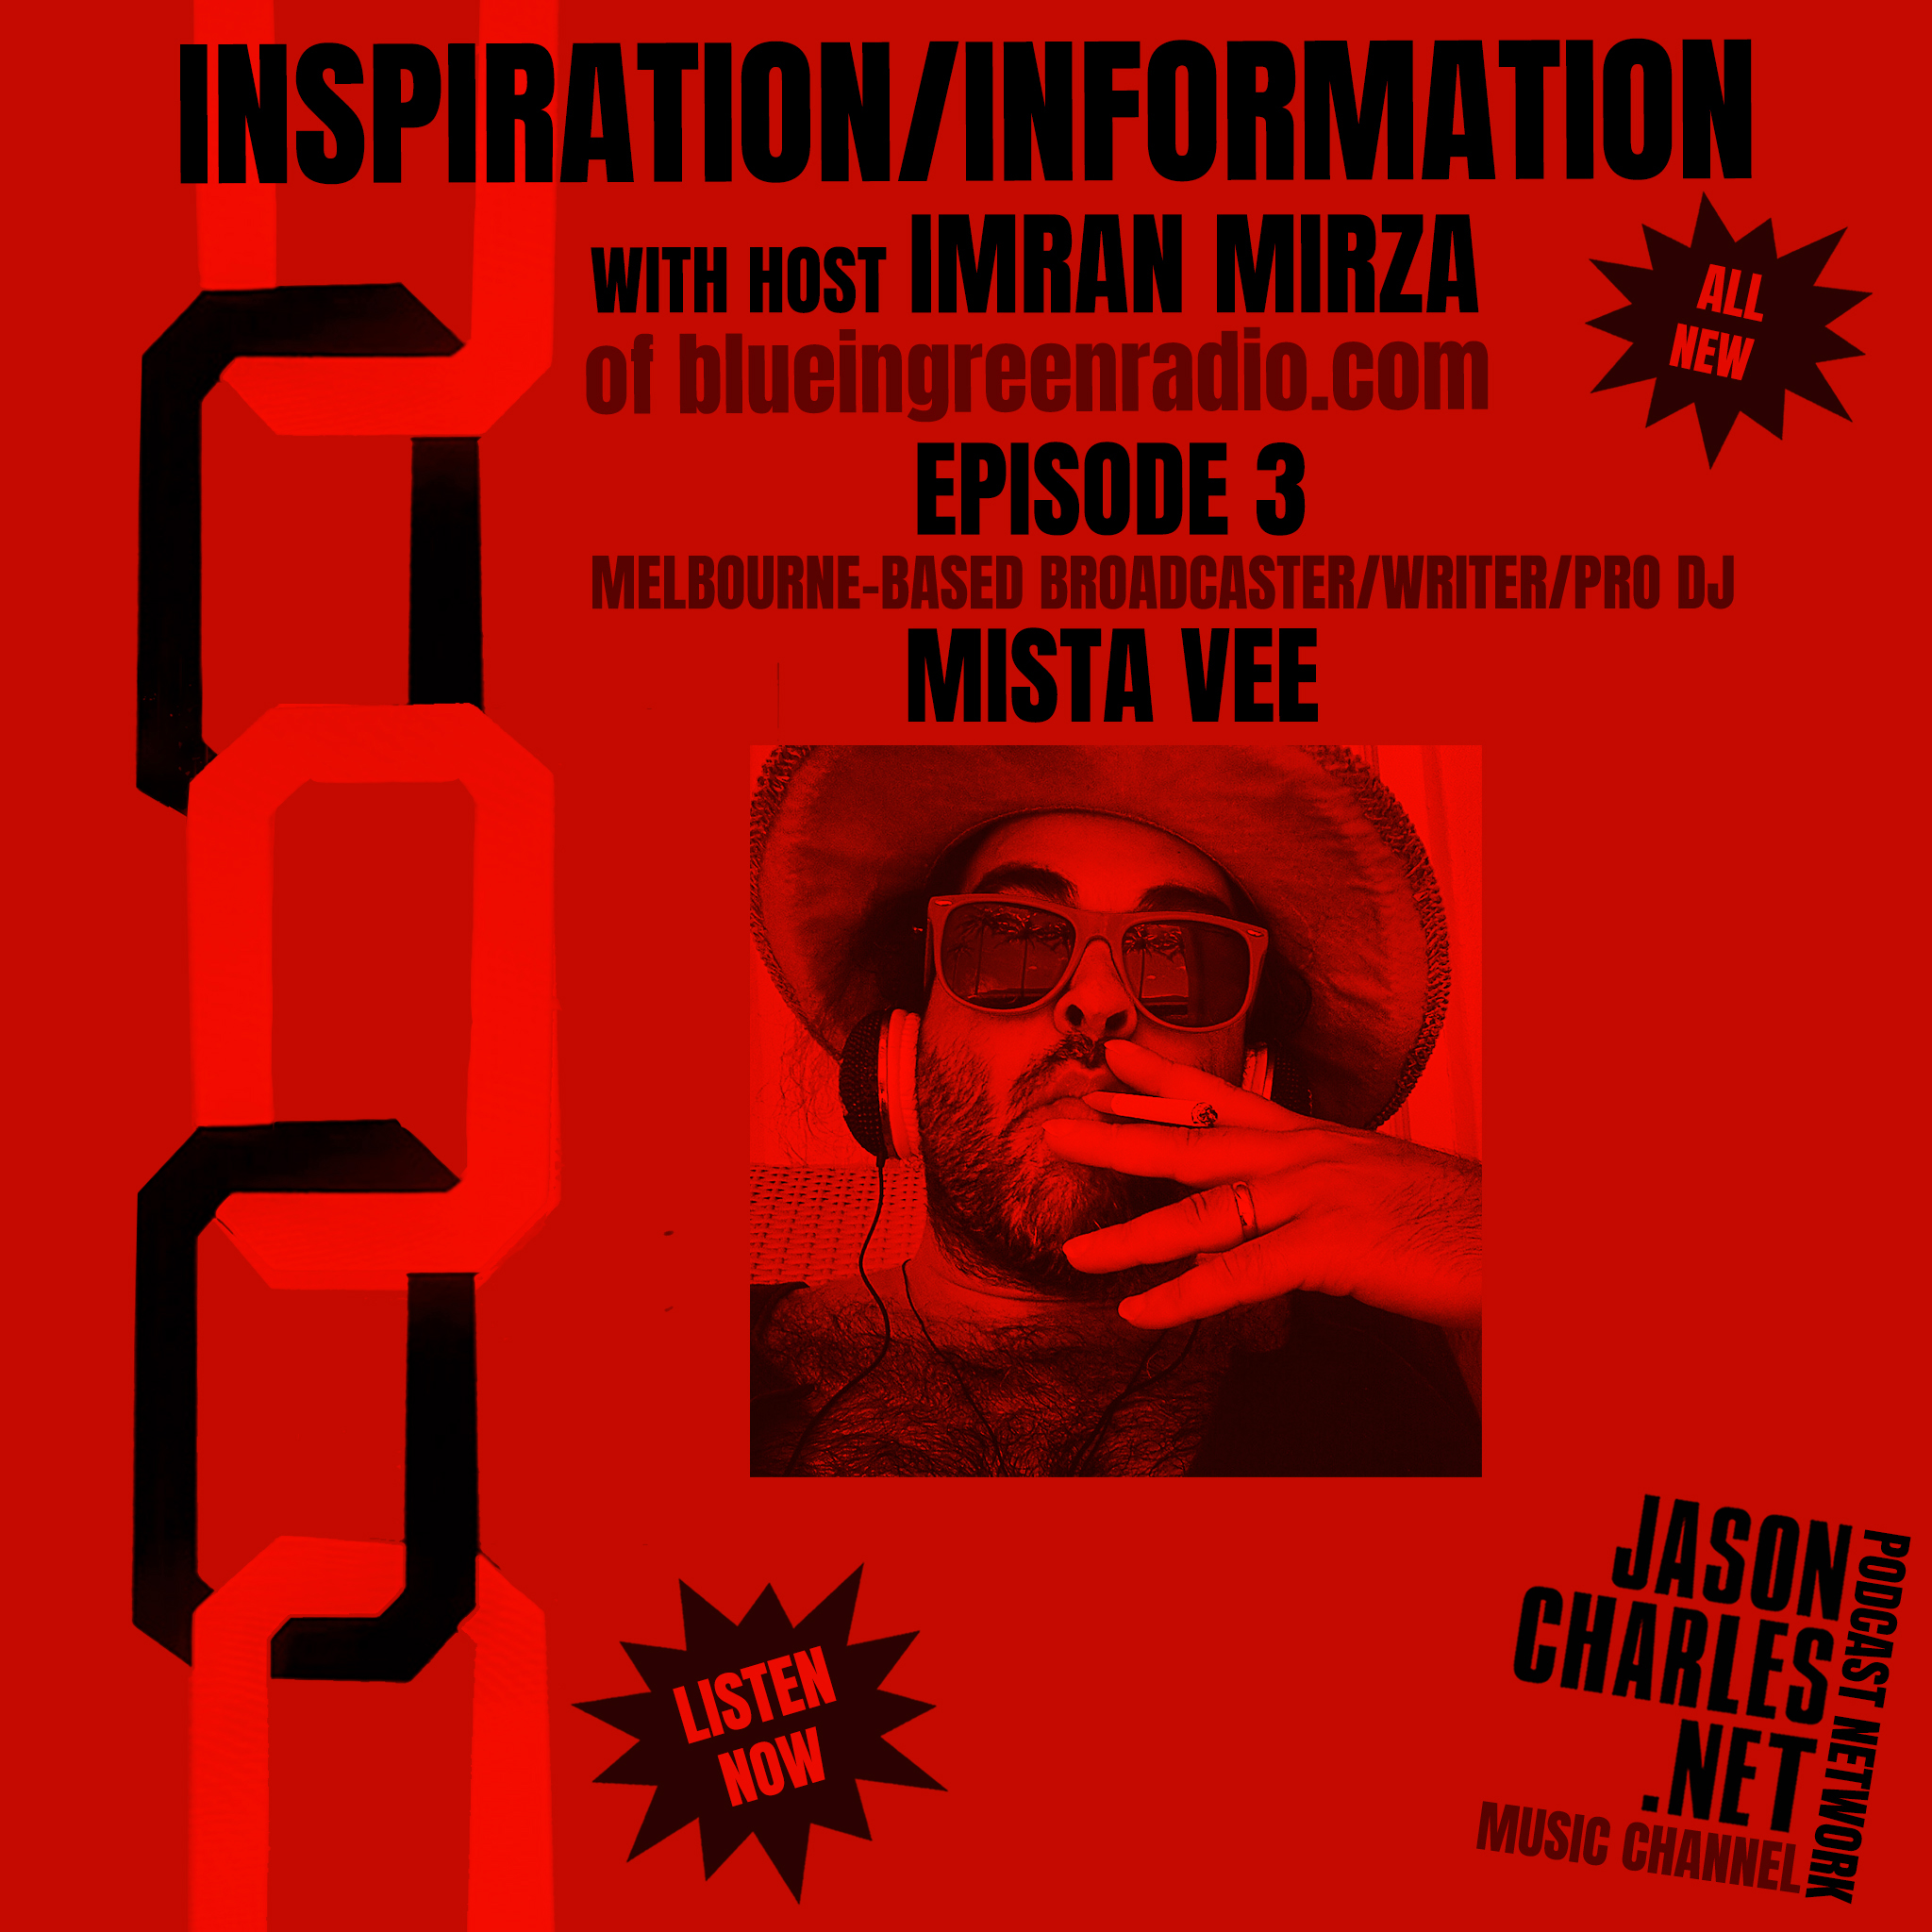 INSPIRATION/INFORMATION with Host Imran Mirza Episode 3 Guest MISTA VEE